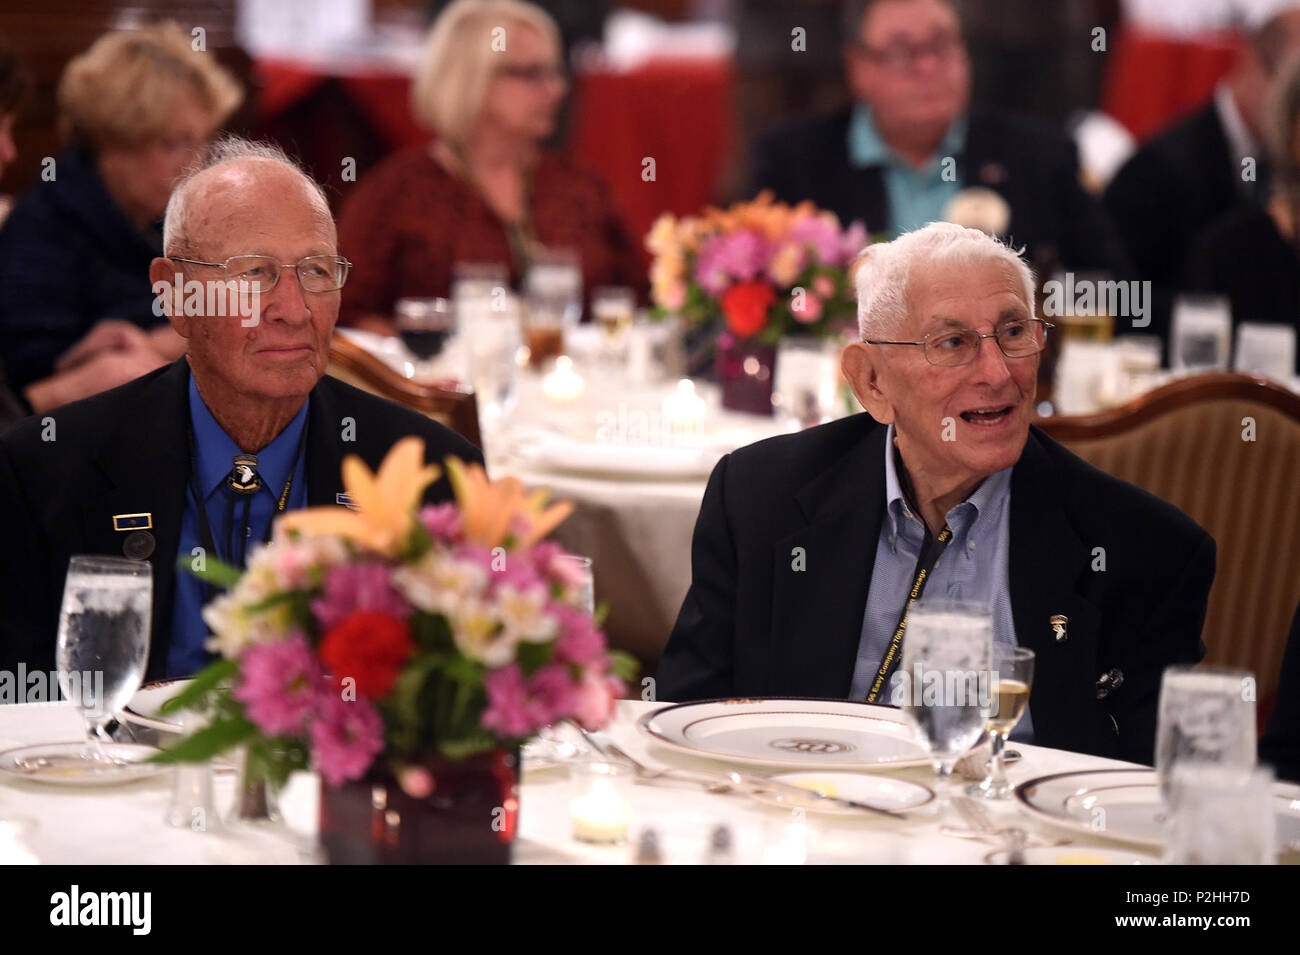 World War II veterans Brad Freeman, sitting left, and Albert Mampre listen to speakers during the 70th anniversary of Easy Company, 2nd Battalion, 506th Parachute Infantry Regiment, 101st Airborne Division reunion in Chicago, September 24, 2016. Both men were members of Easy Company and the only two members at the reunion.  (U.S. Army photo by Sgt. Aaron Berogan/Released) Stock Photo